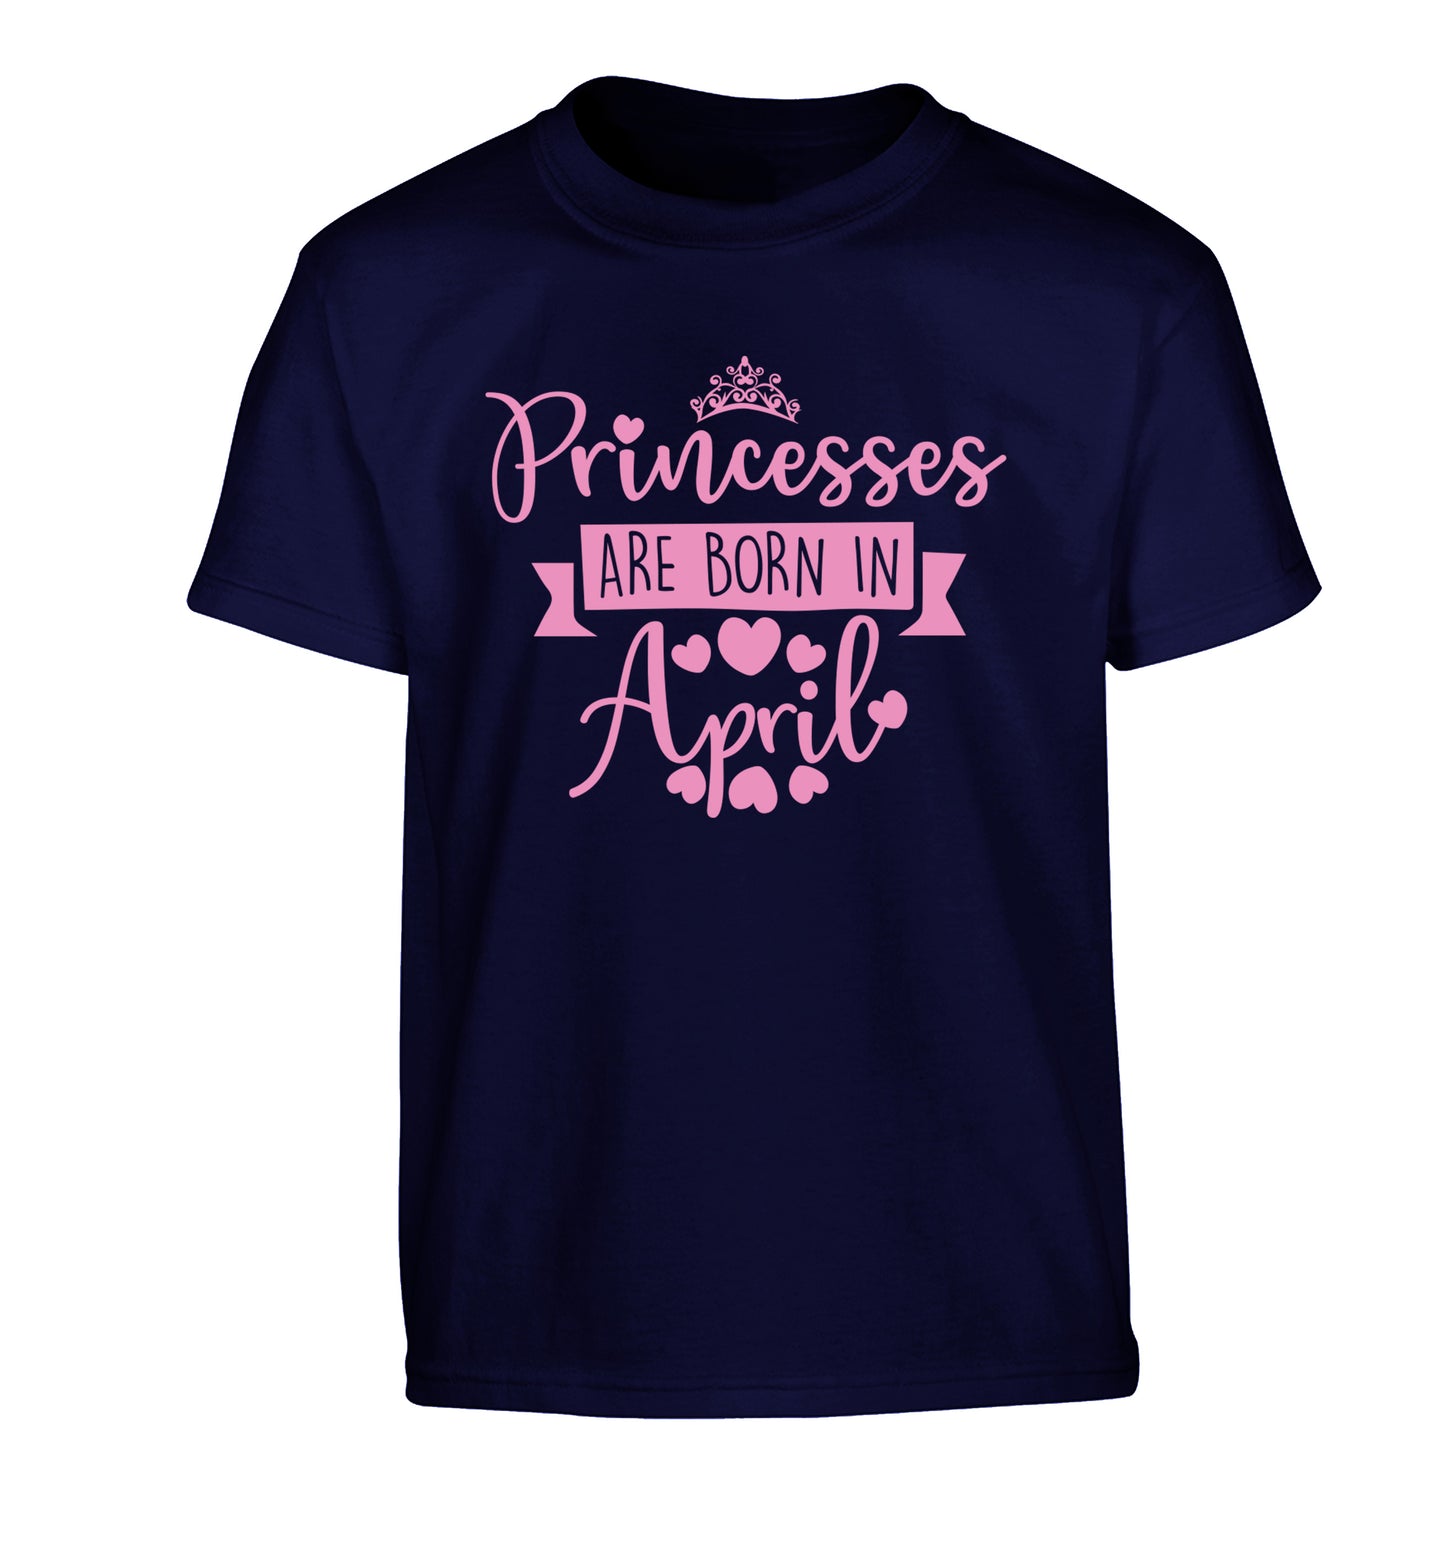 Princesses are born in April Children's navy Tshirt 12-13 Years